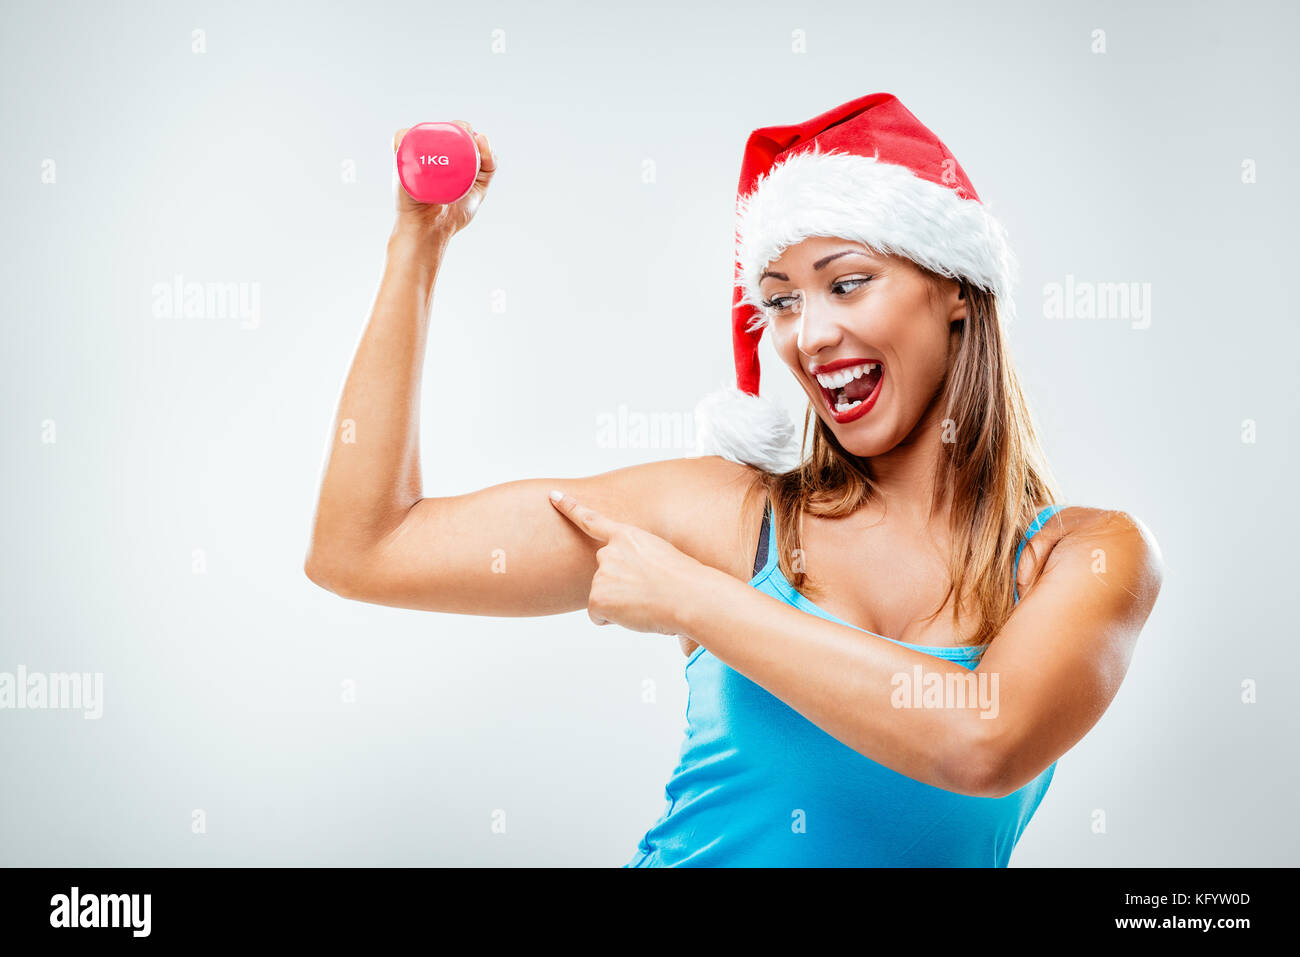 Fitness girl smiling happy with a Santa's cap on her head, lifting weights looking strength training hand muscles. White background. Stock Photo